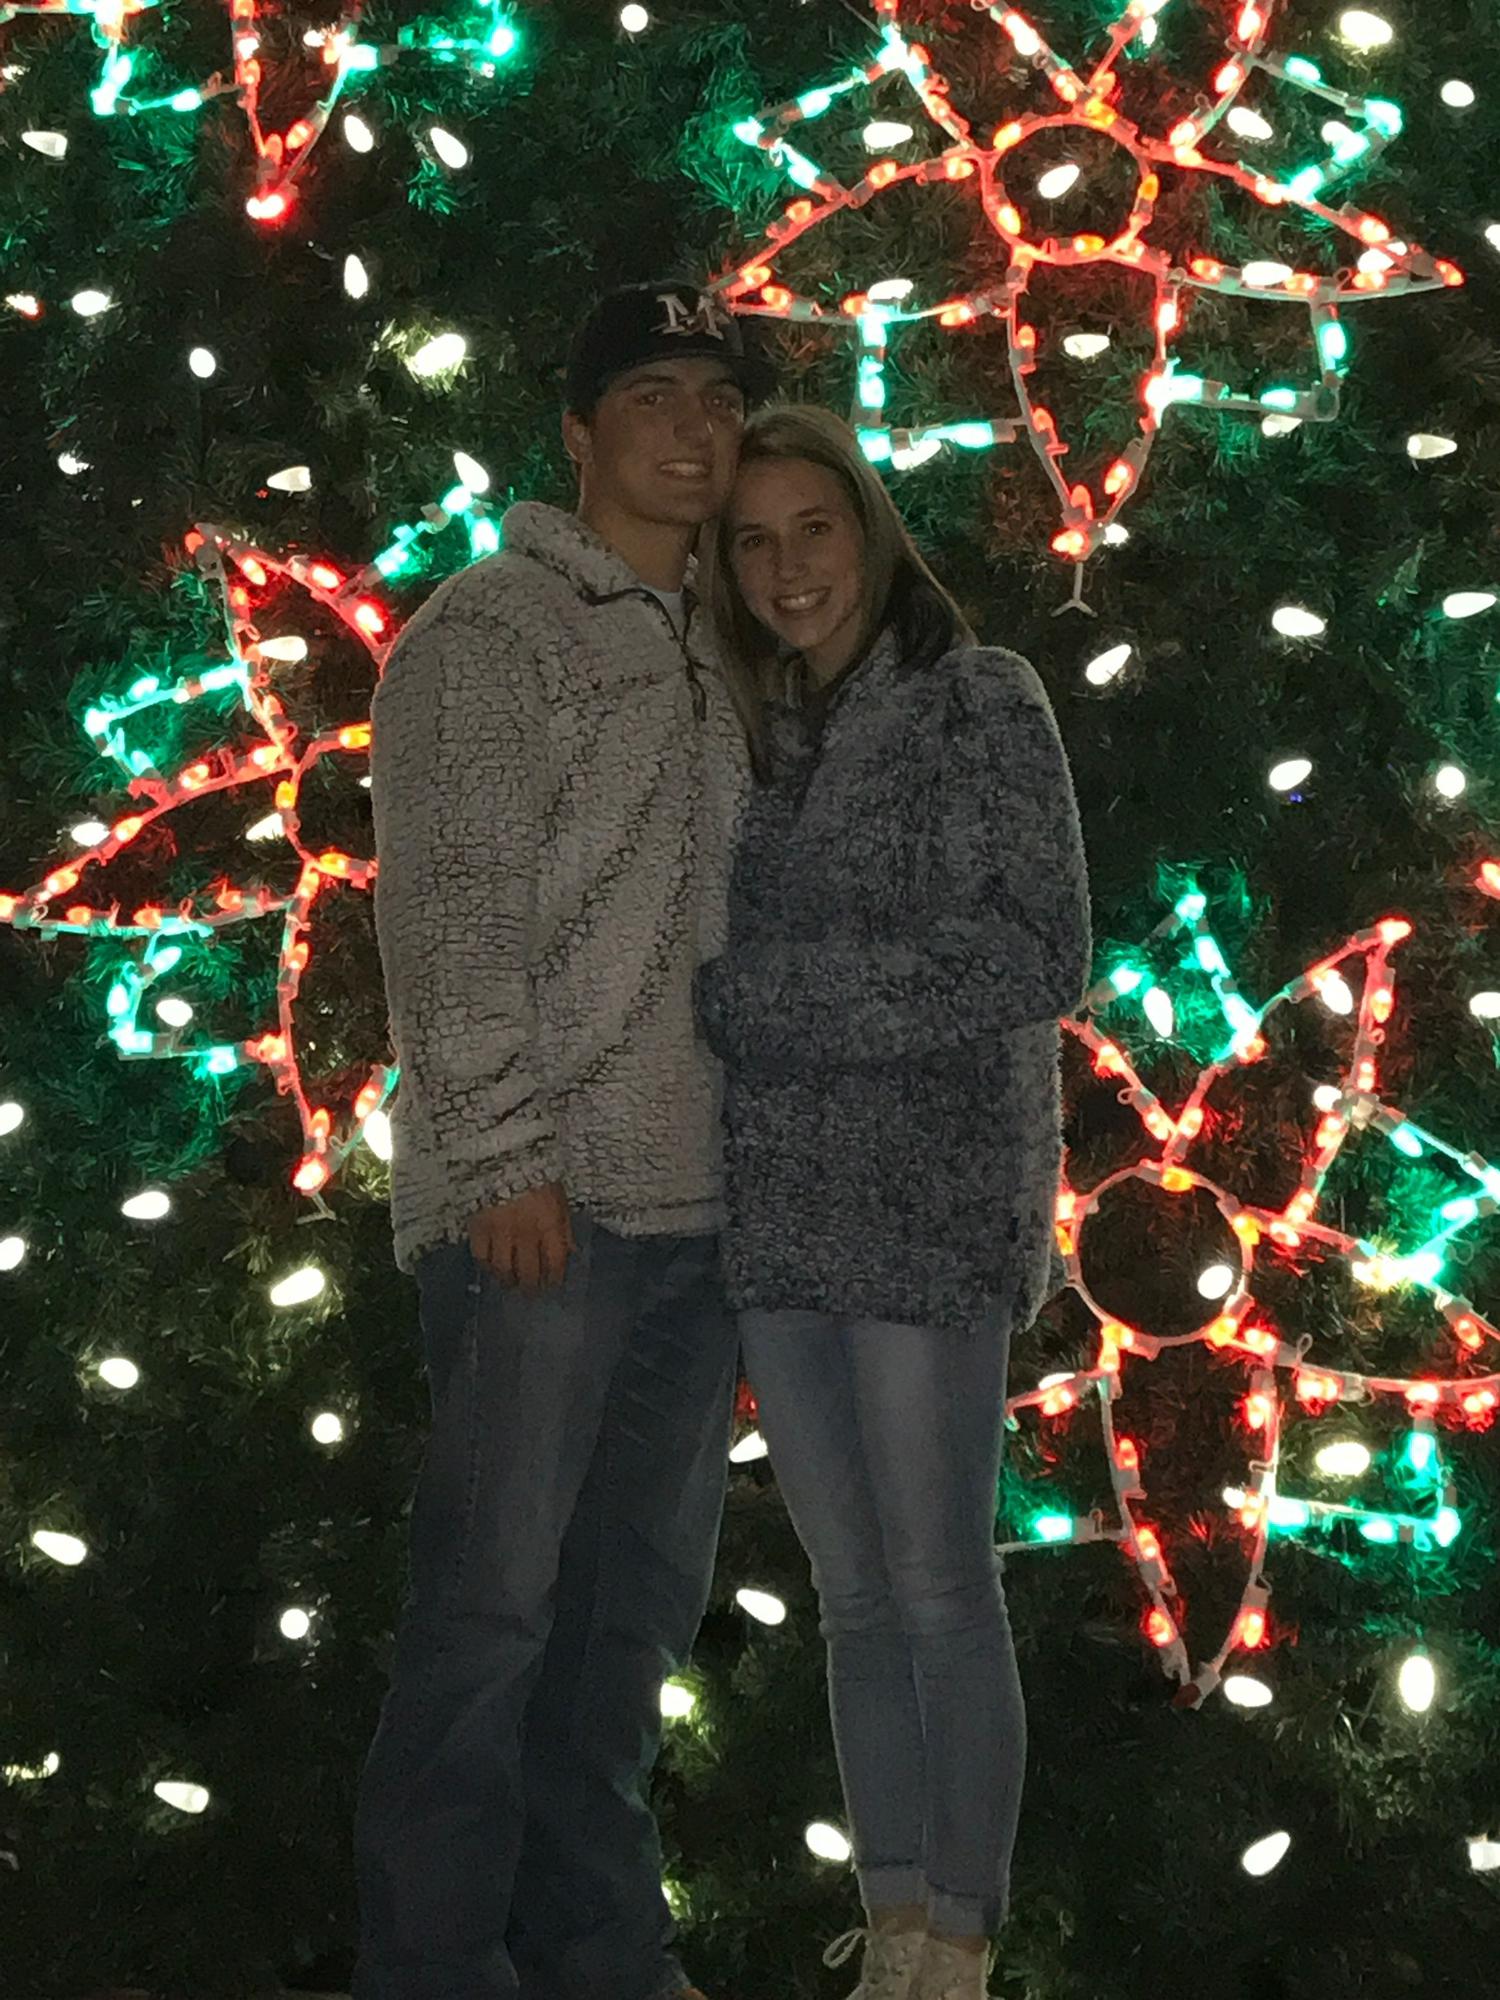 Our first Zoo Lights